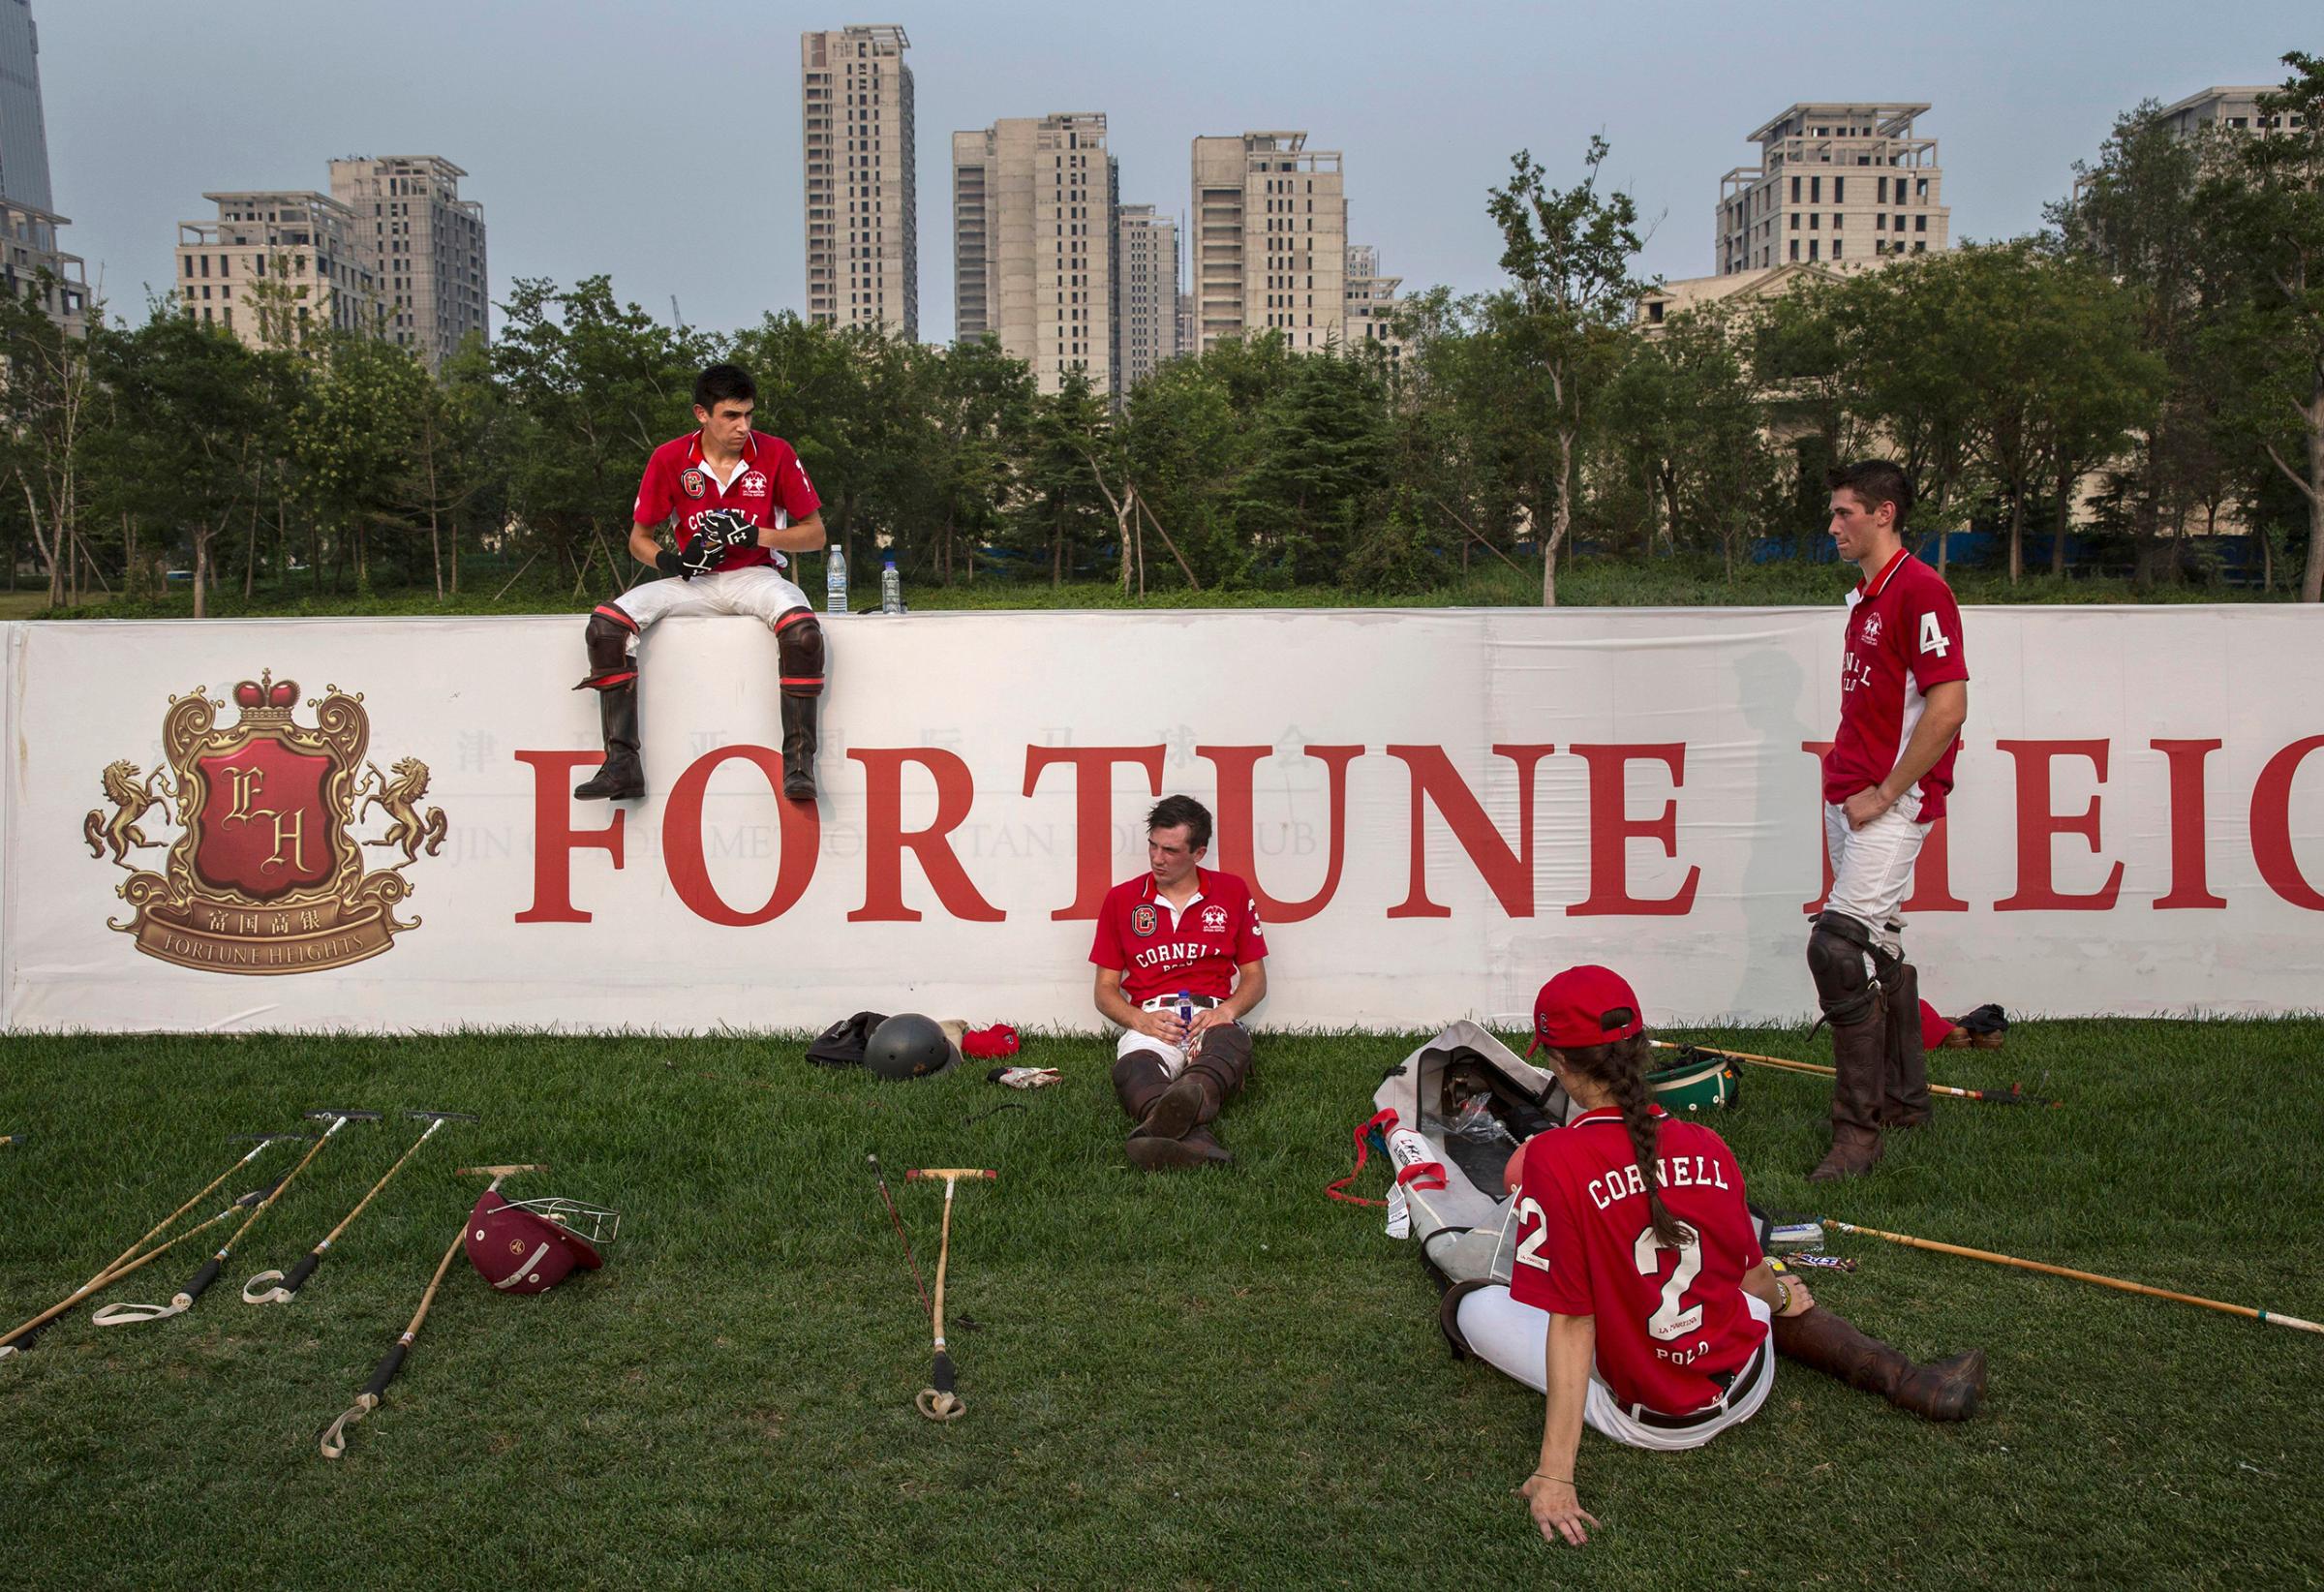 Players from the Cornell University polo team rest during a break in a match during the intervarsity tournament held at the Tianjin Goldin Metropolitan Polo Club in Tianjin, China, on July 17, 2016.